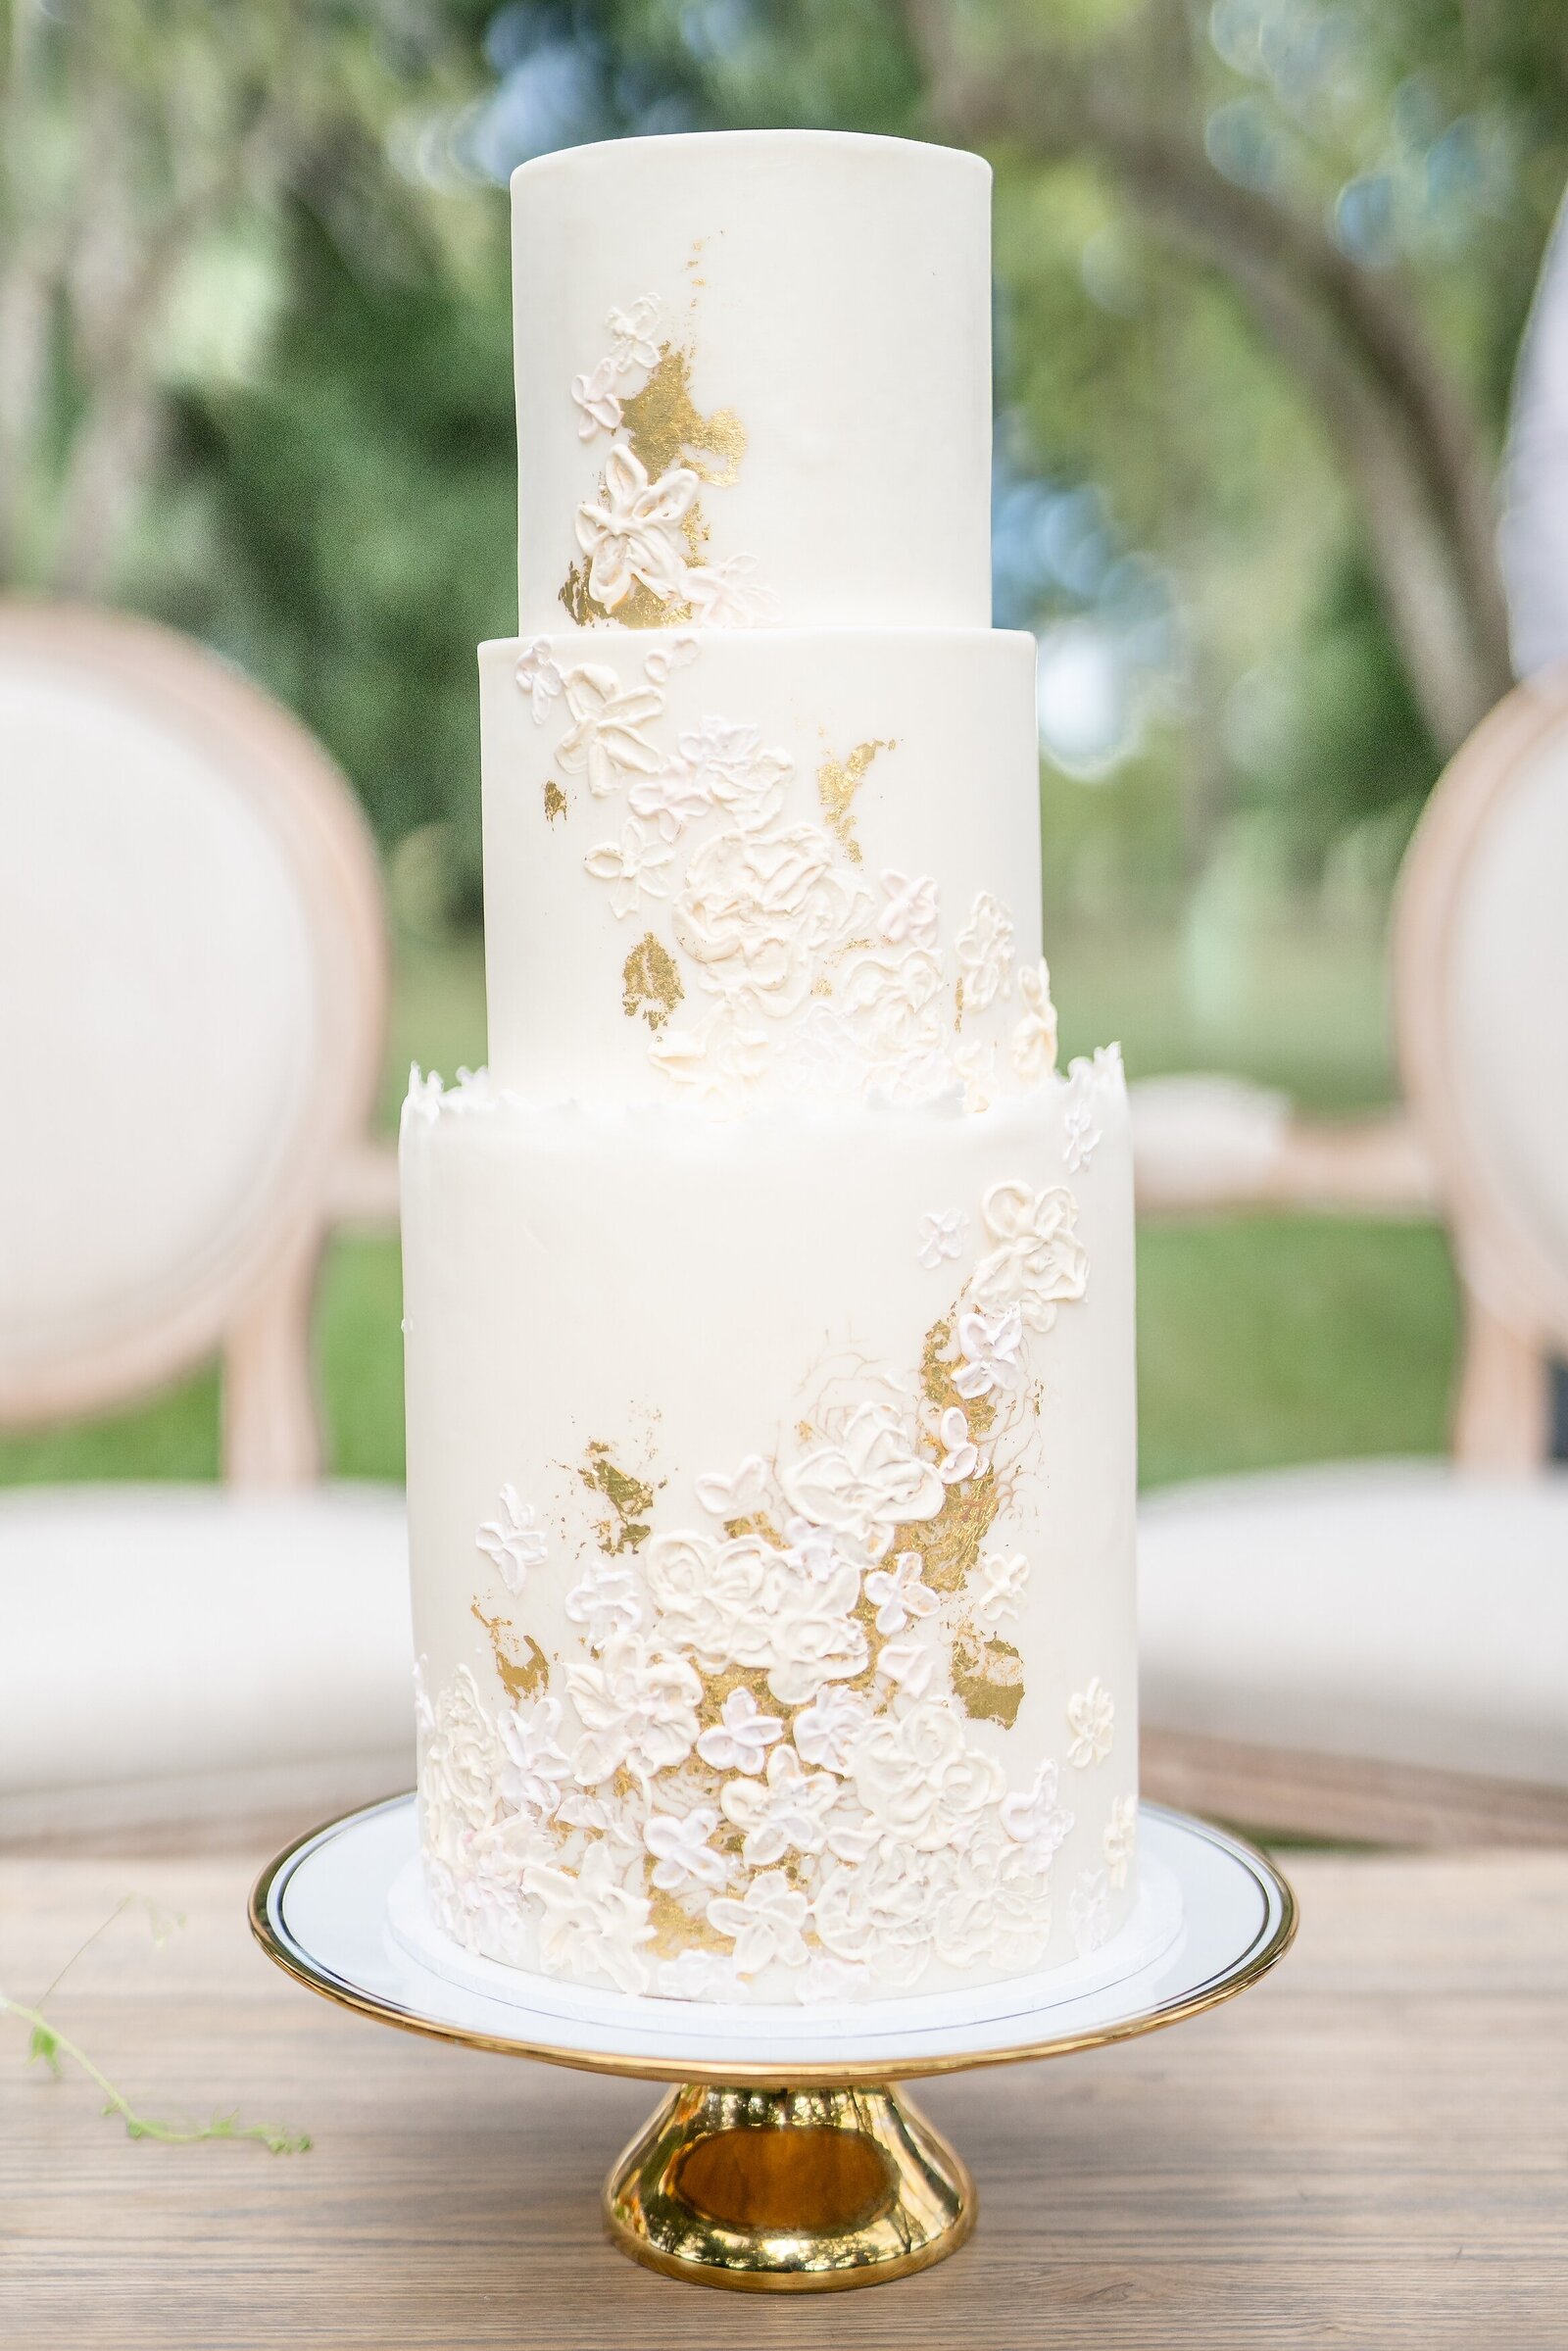 Amalfi-coast-inspired-micro-wedding-3-tier-wedding-cake-with-stunning-gold-cake-stand-and-gold-and-white-floral-decorations-by-The-Dessert-Room